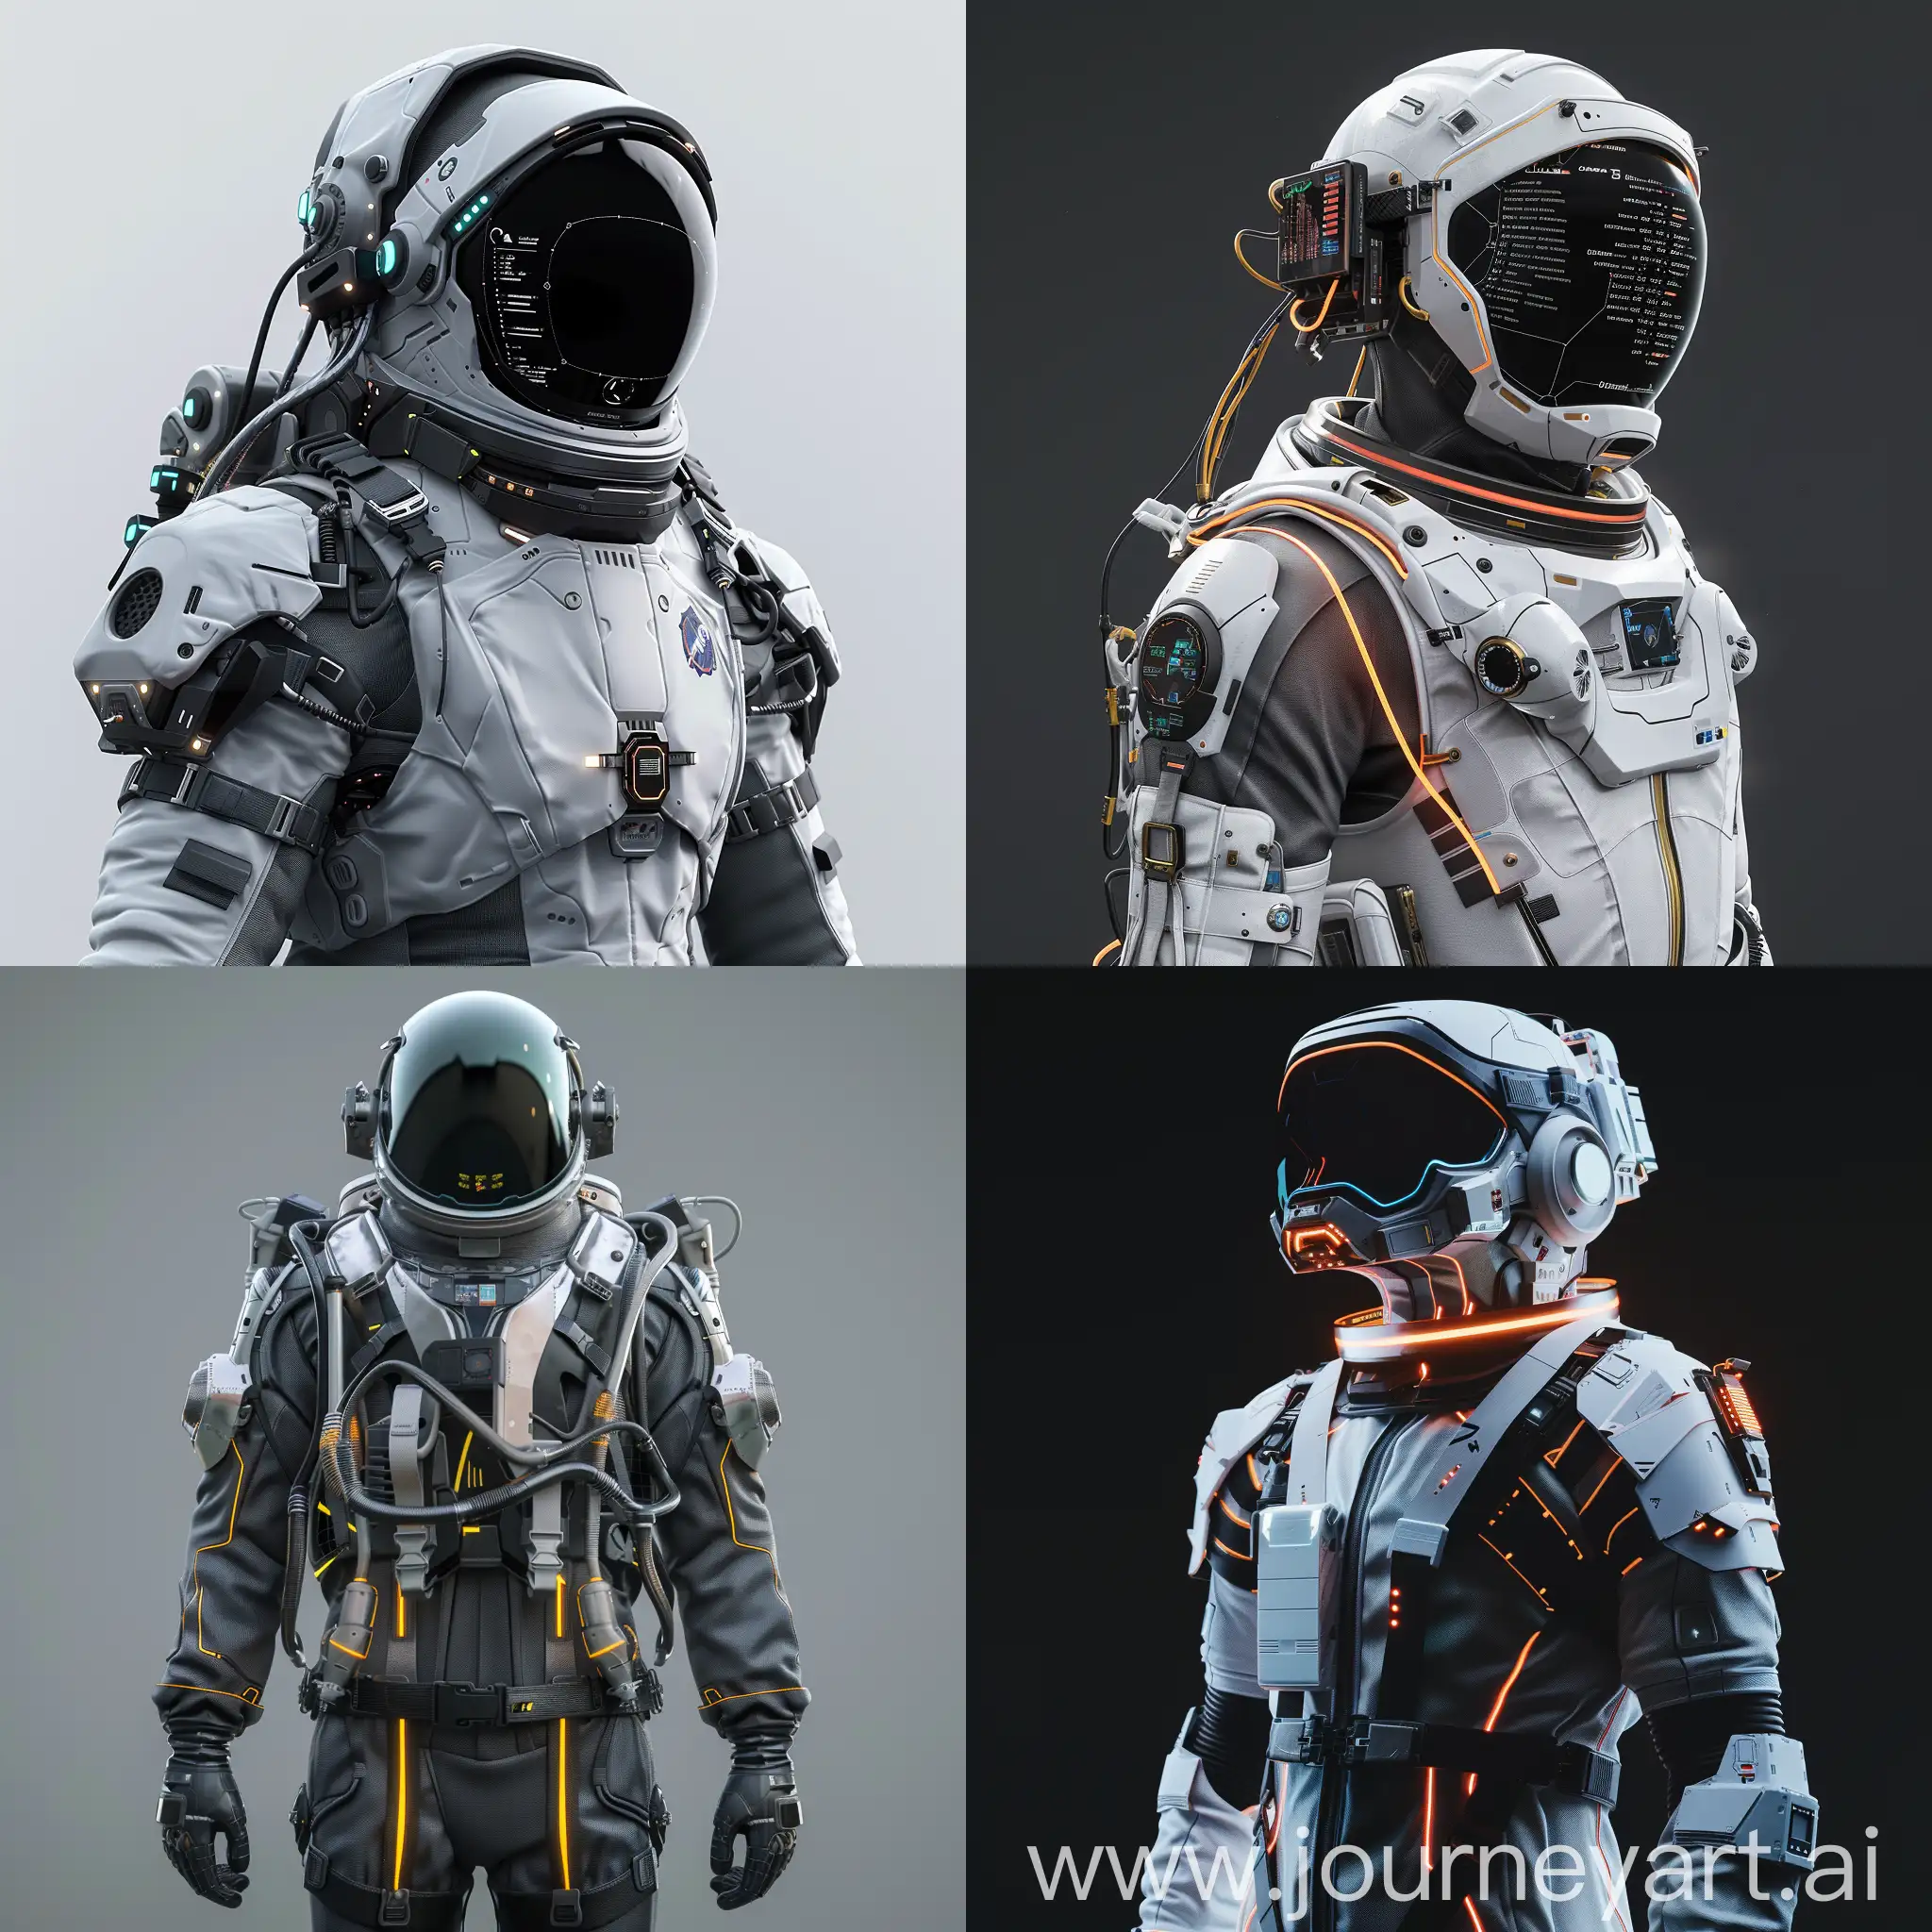 Futuristic-Space-Suit-with-Advanced-Life-Support-Systems-and-Smart-Fabrics